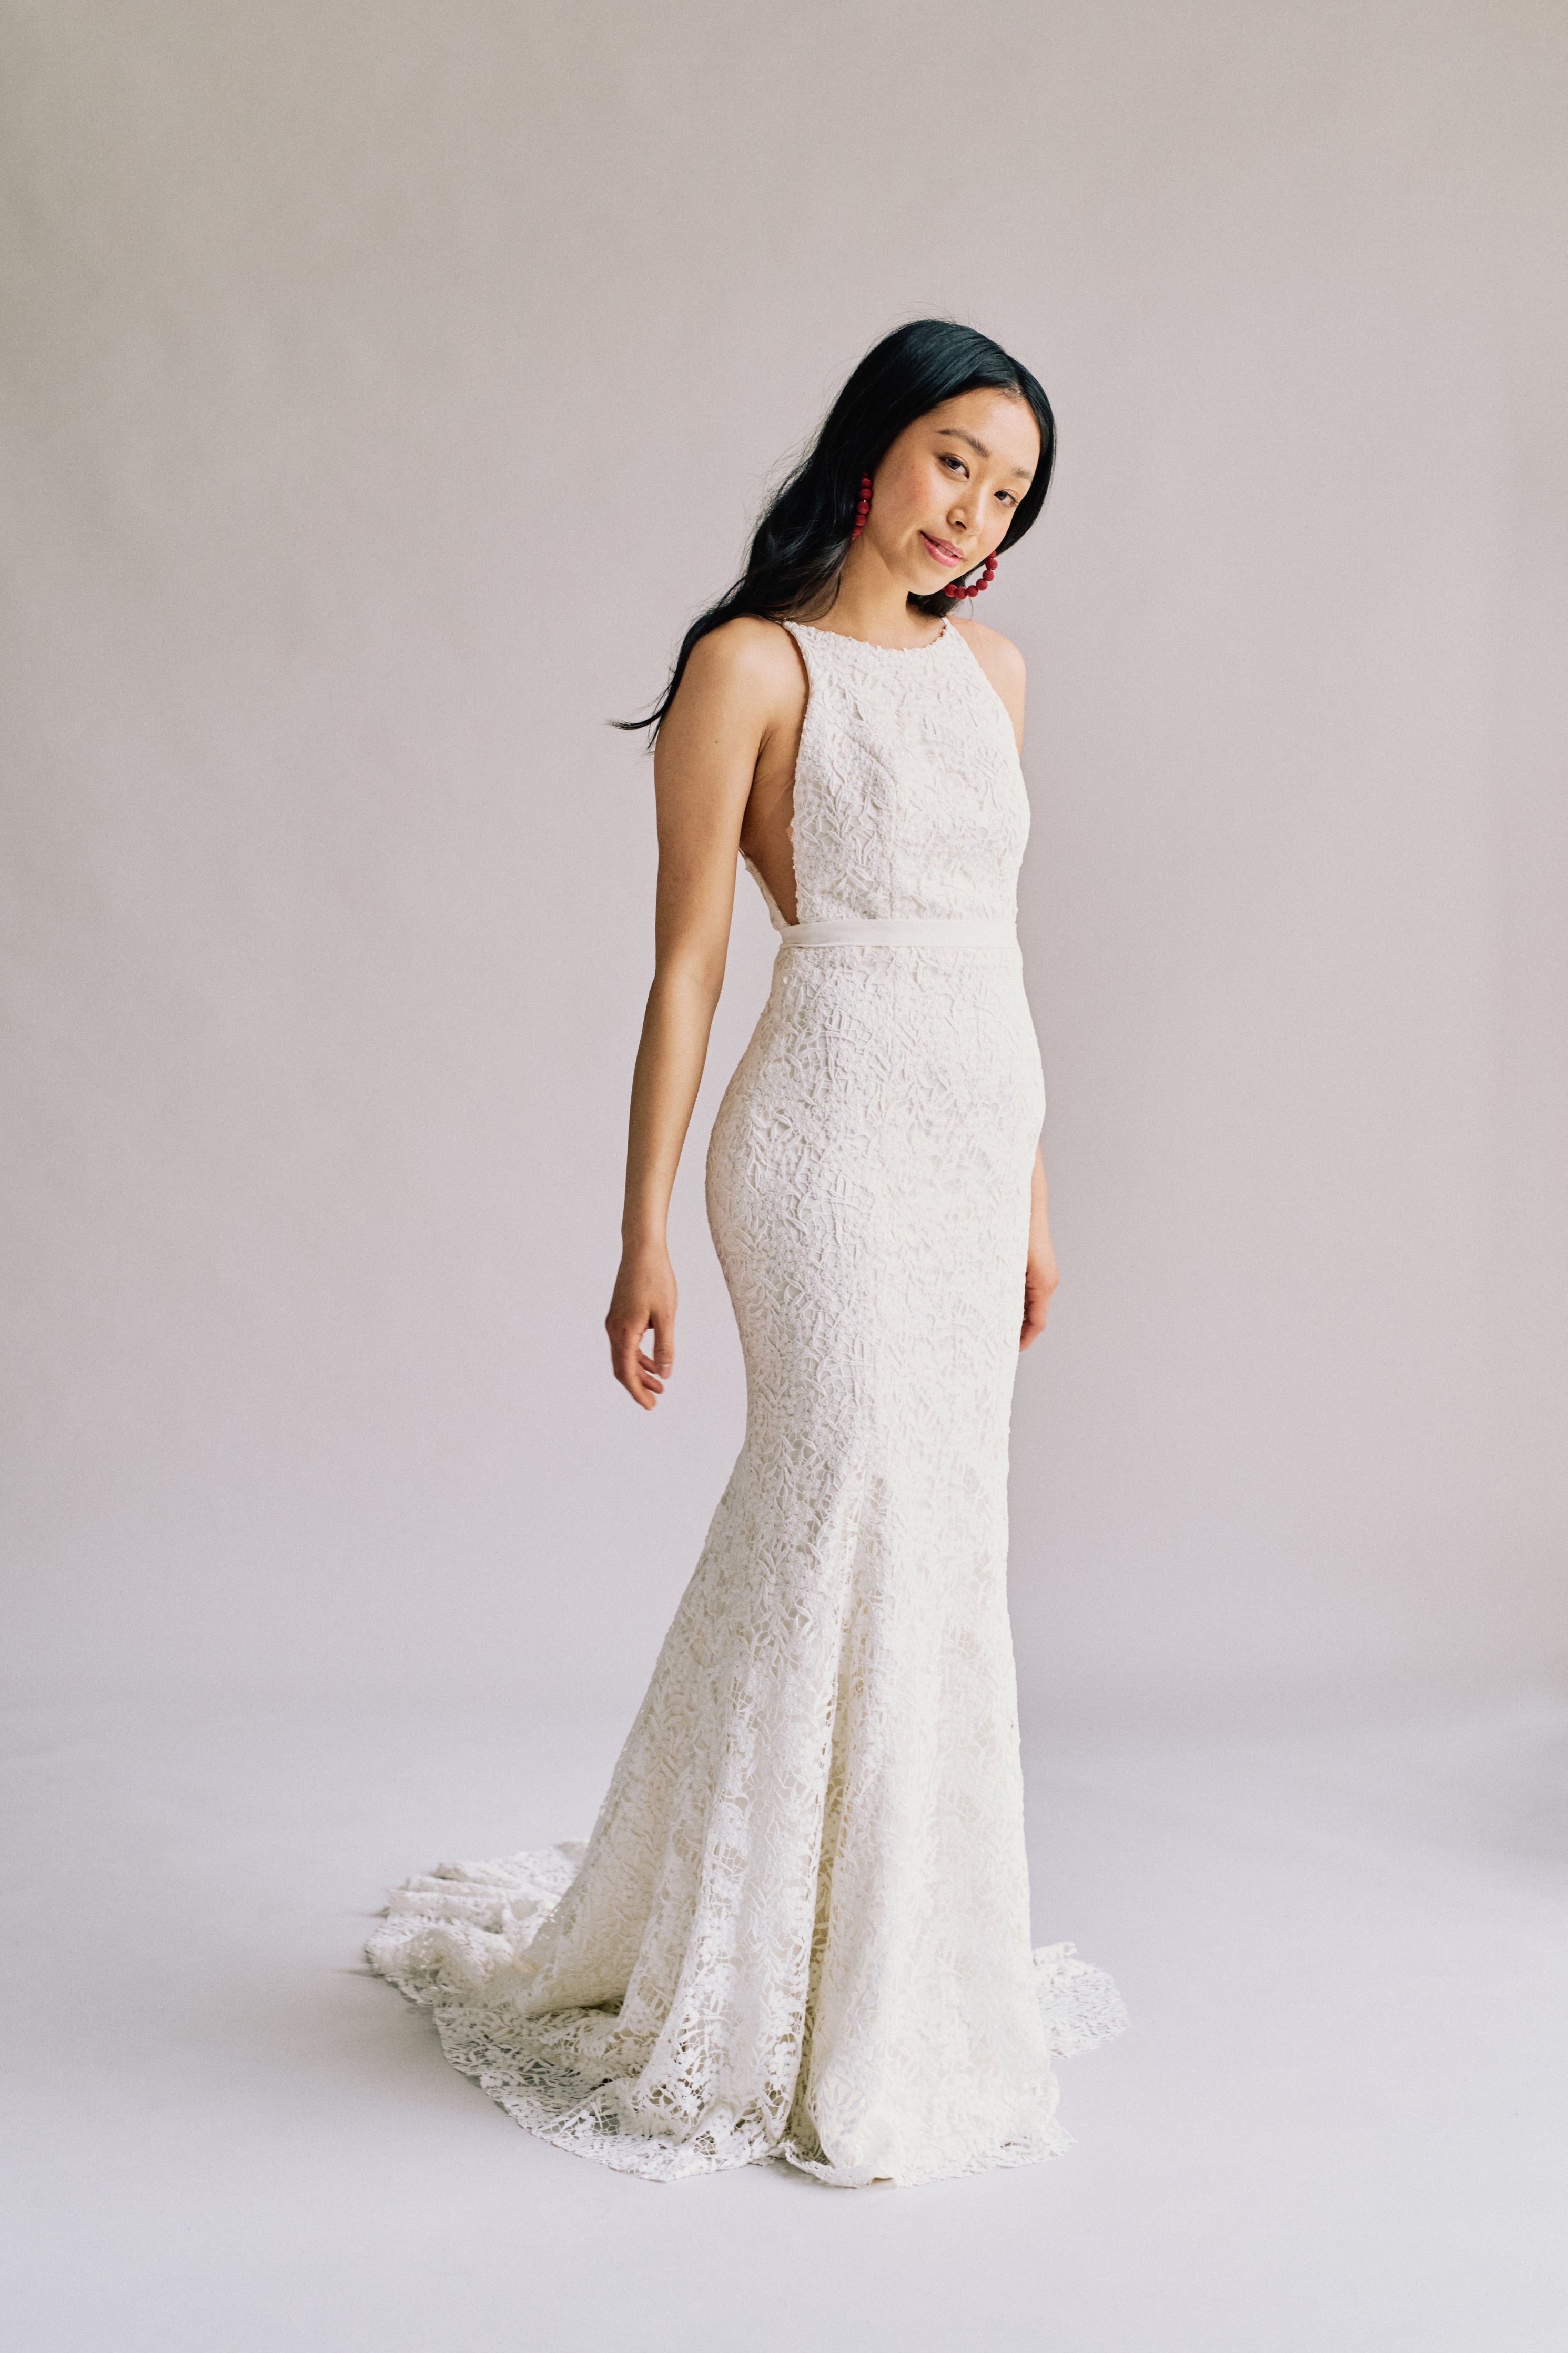 High neck low back form fitting wedding dress in full lace with a long train